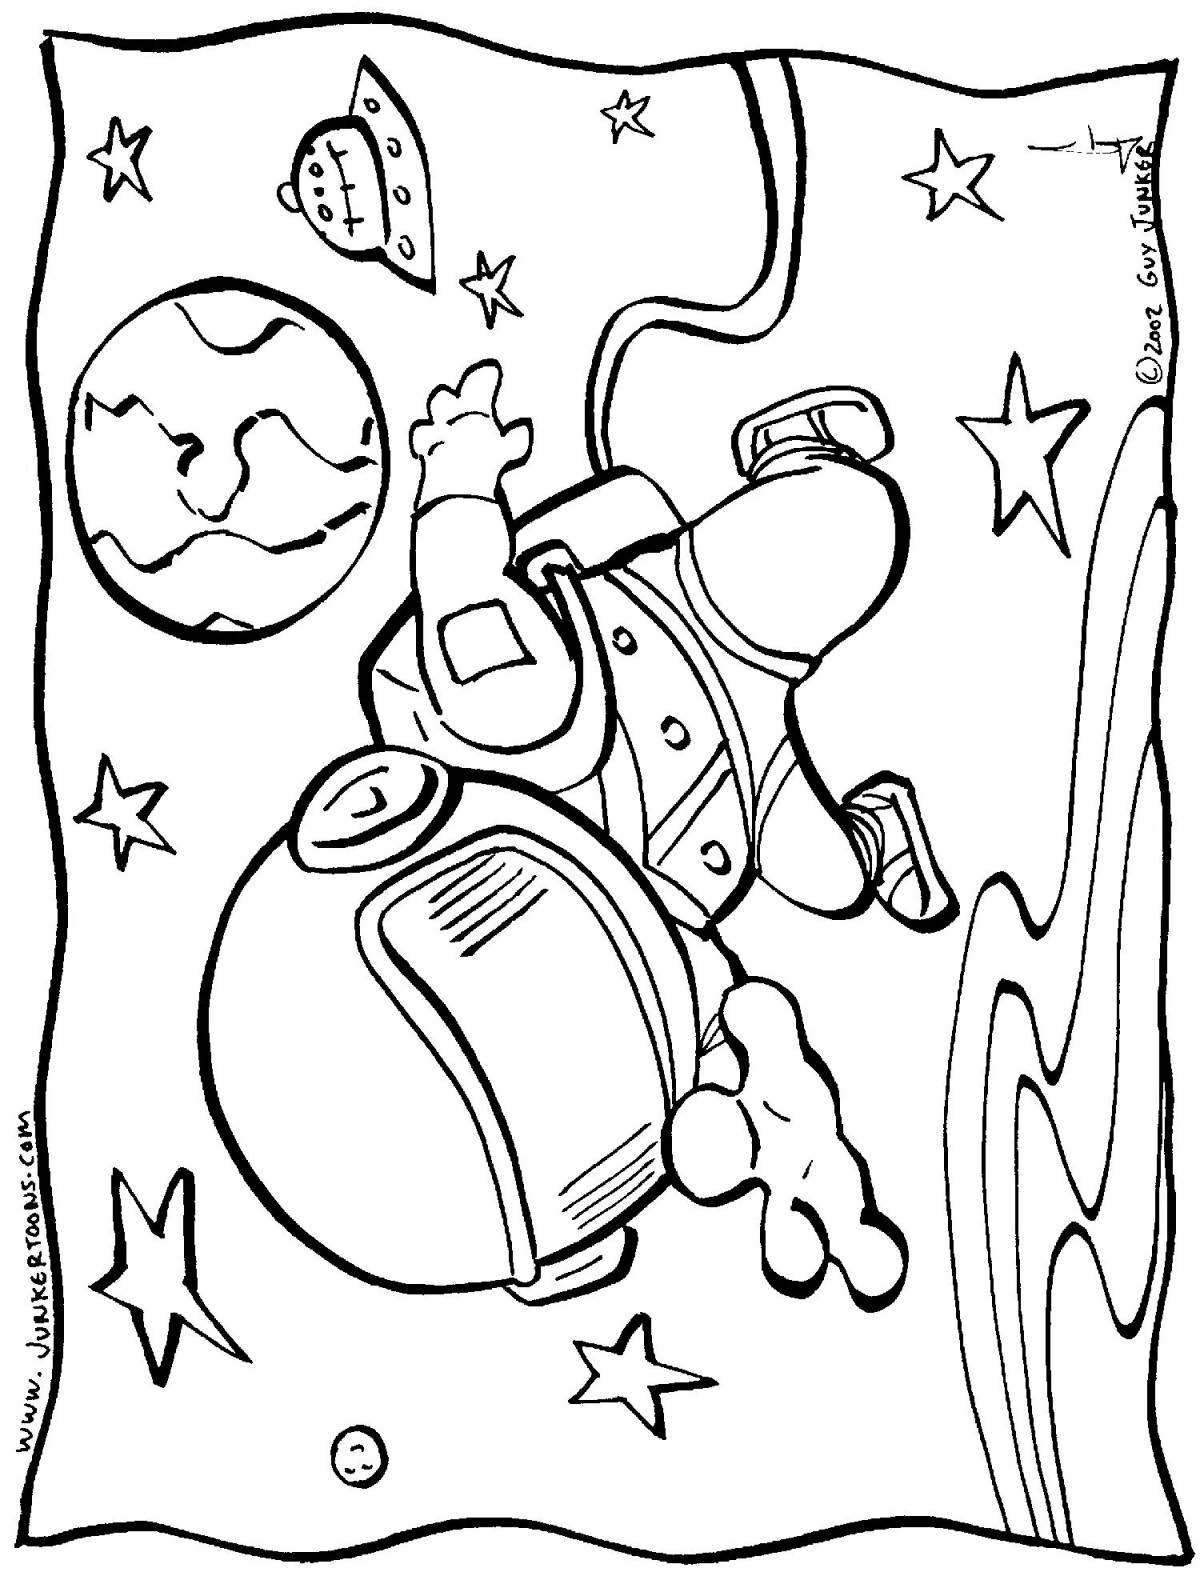 Great 1st class space coloring book